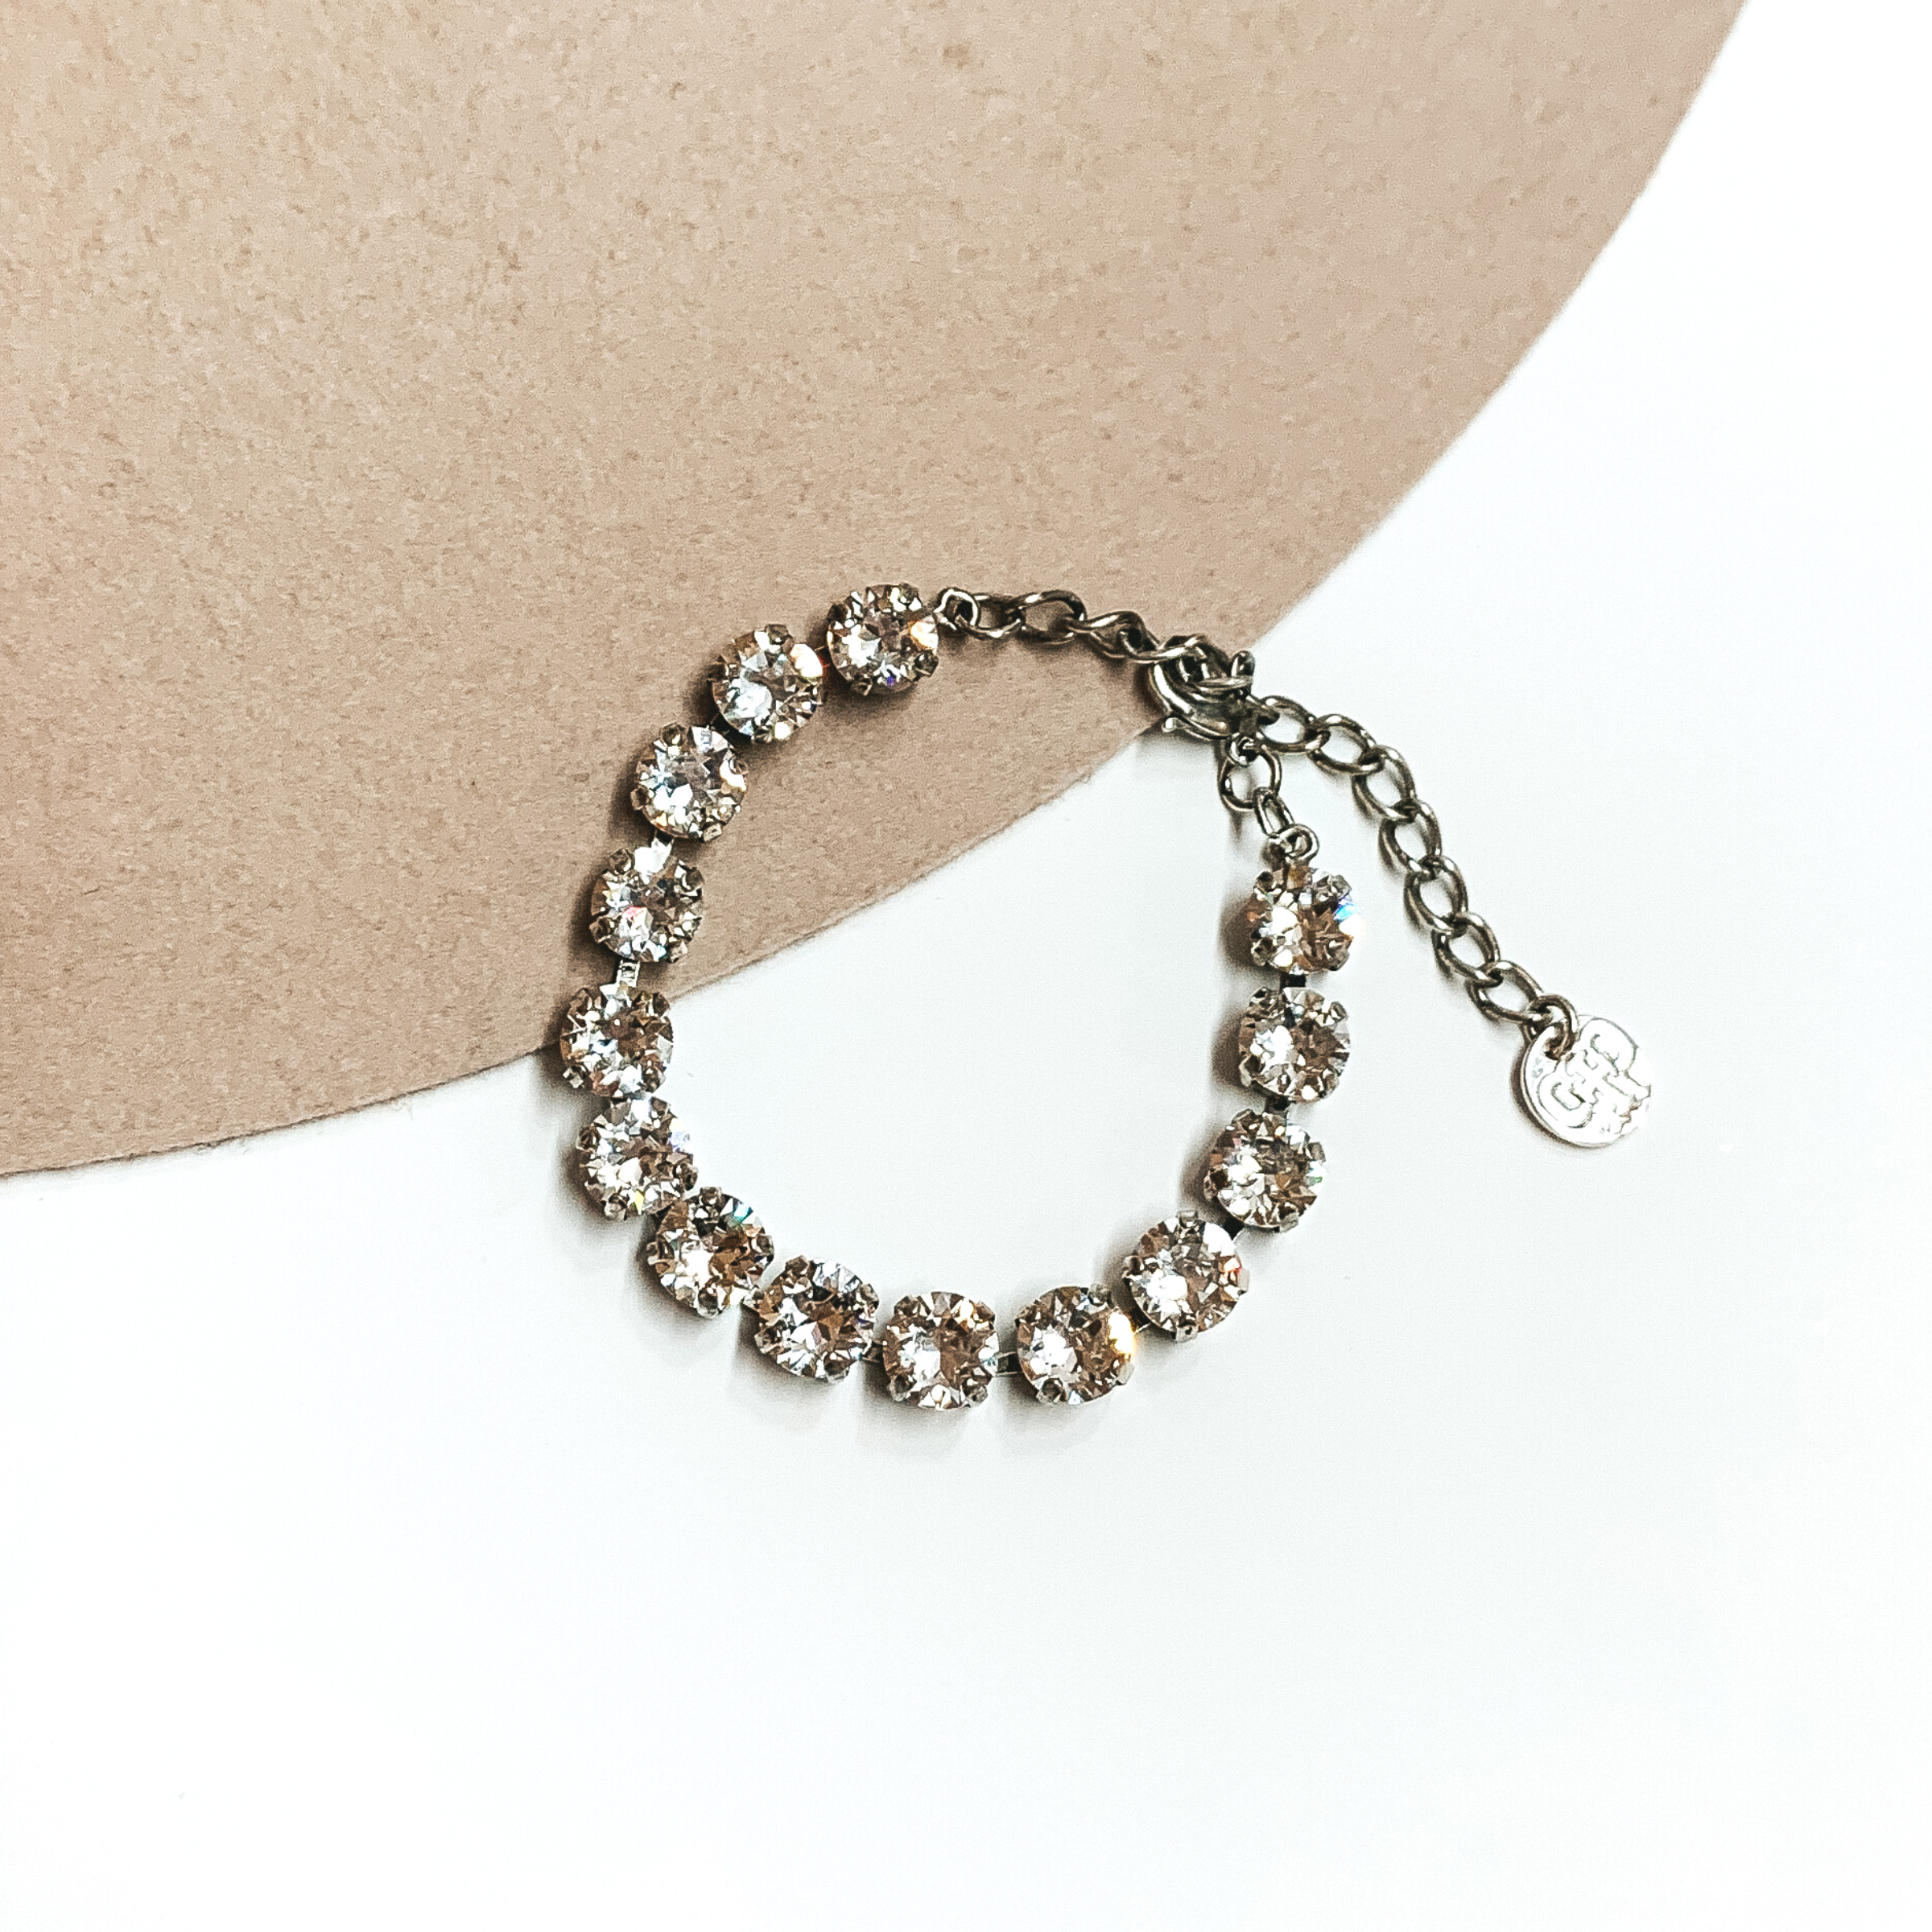 Circle, clear crystal bracelet with a silver backing. This bracelet is pictured on a white and tan background. 